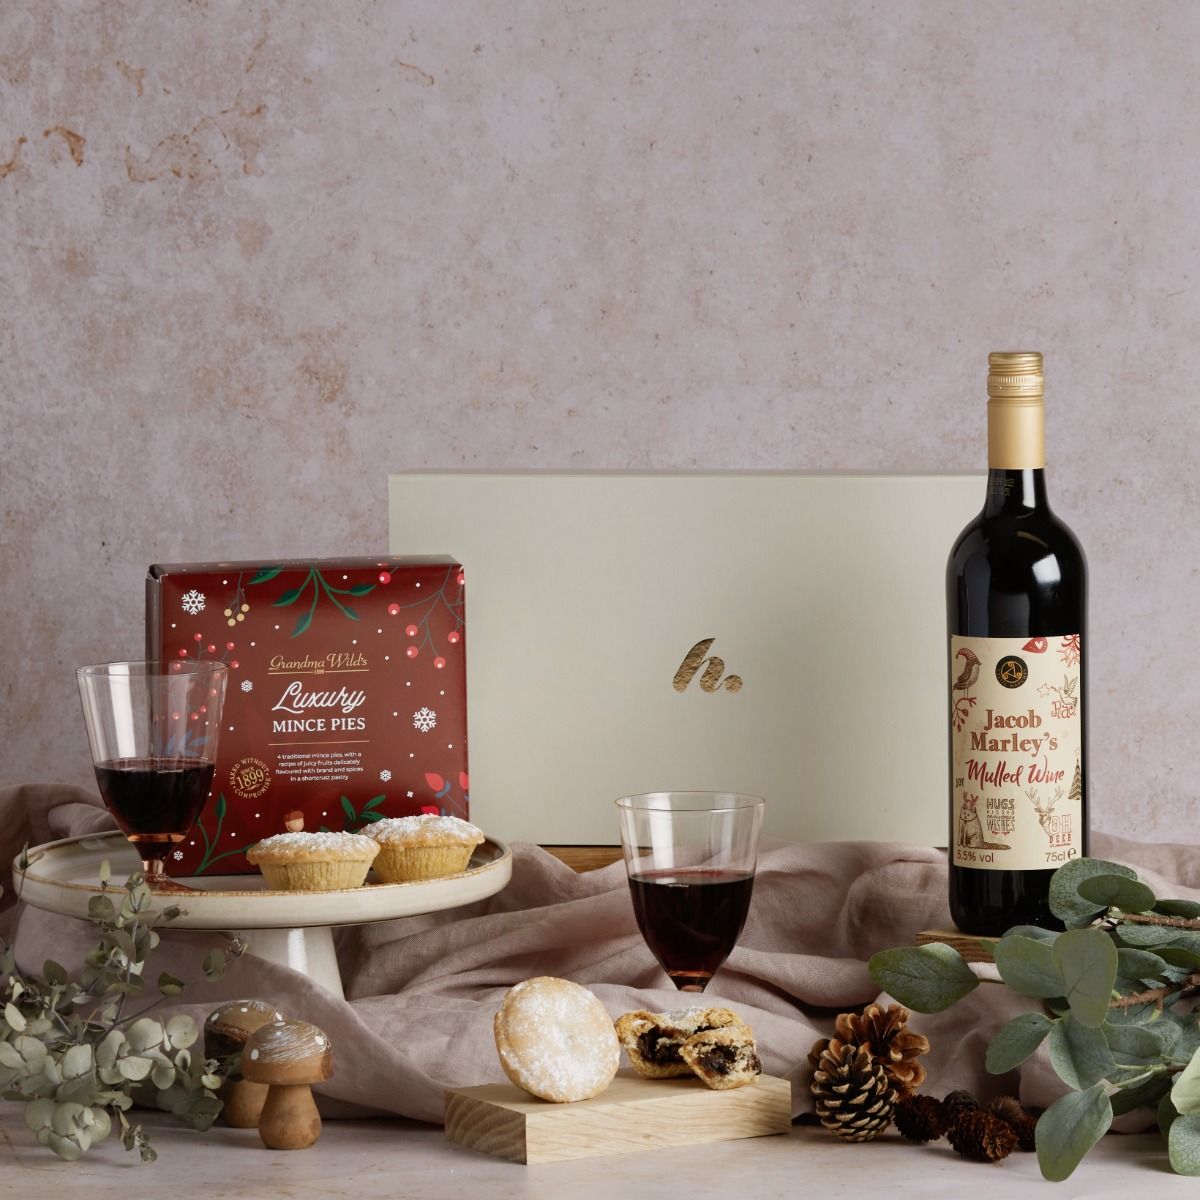 The Festive Mulled Wine and Mince Pies gift box with contents on display